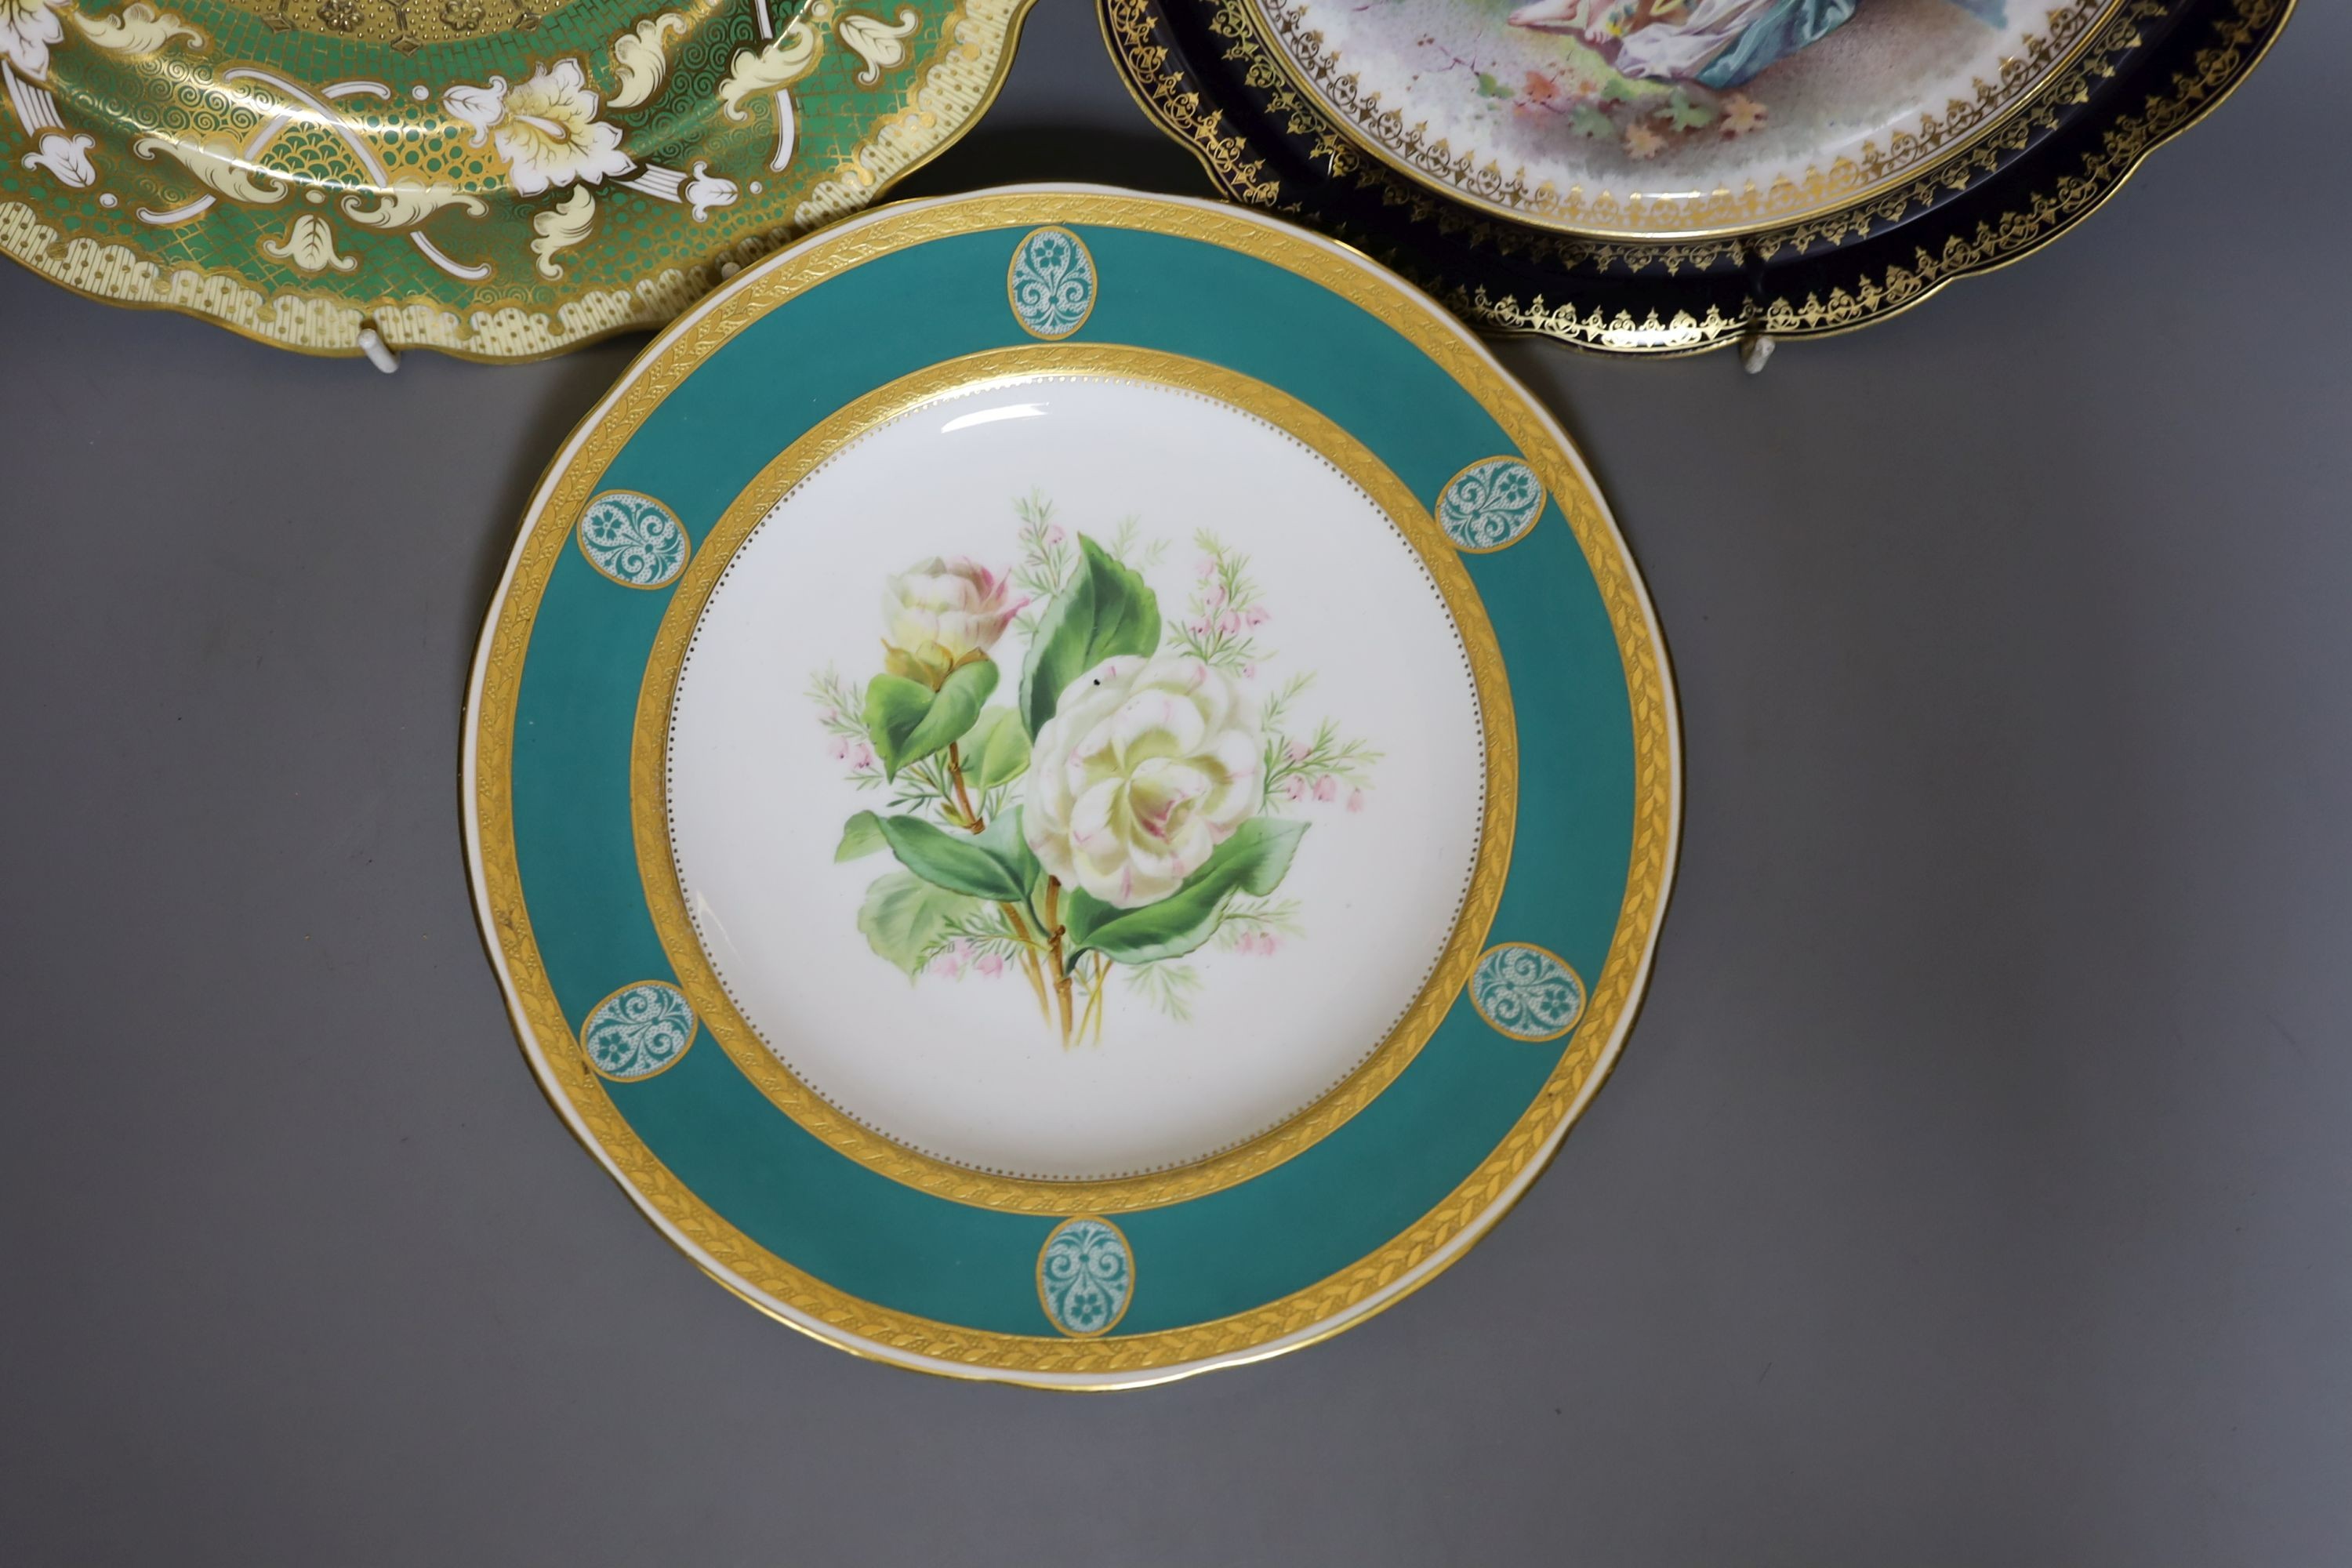 Two 19th century English porcelain flower painted plates, one by Minton and a continental - Image 2 of 6